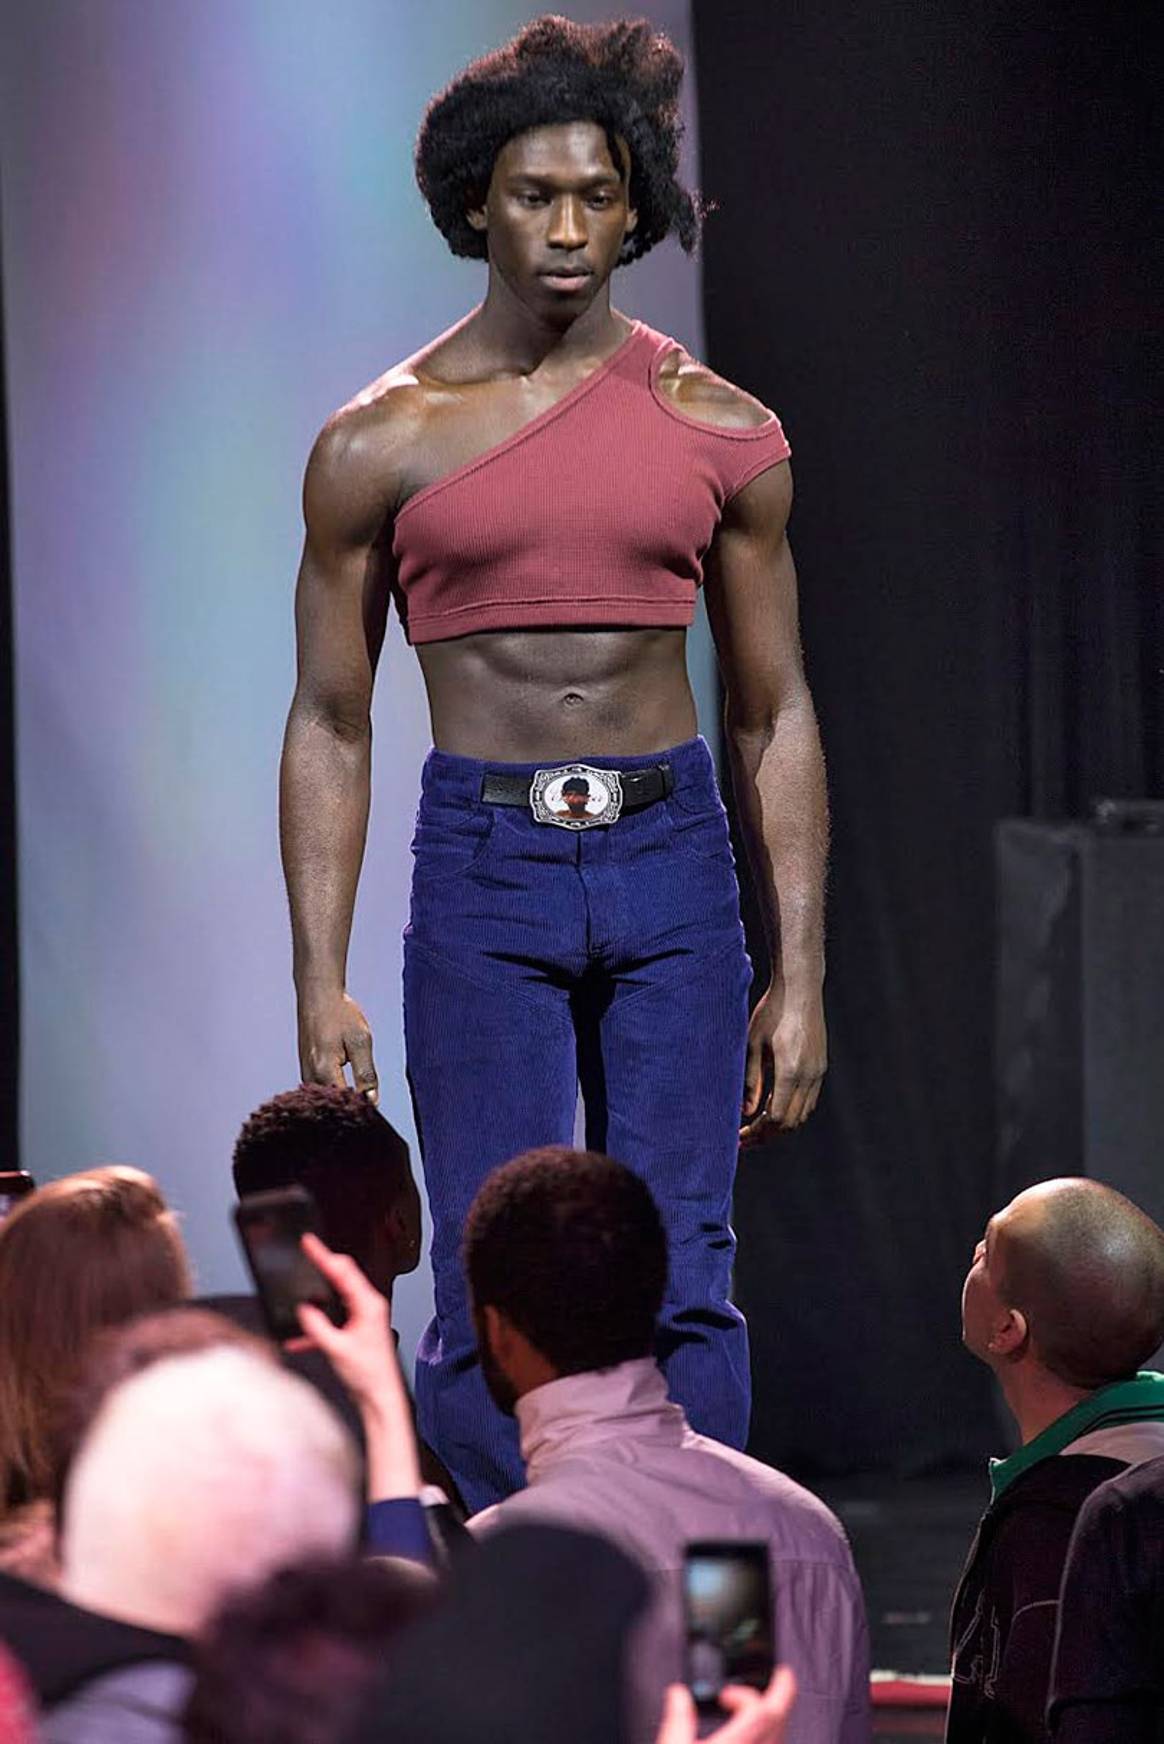 Telfar could be just what New York Fashion Week needs